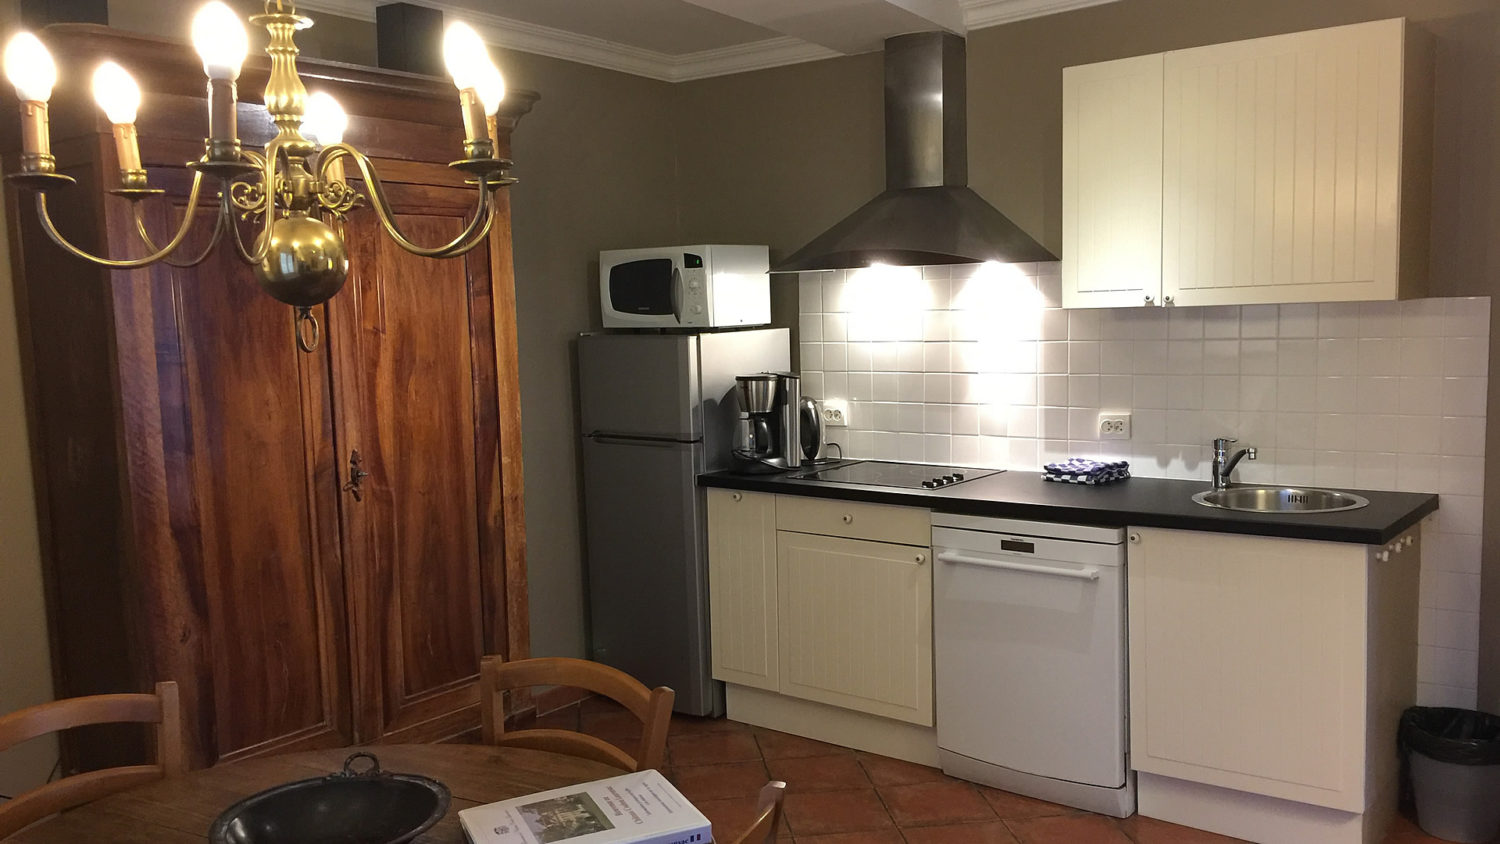 Cottage "Sauternes" (4 pers) Kitchen with dishwasher etc.